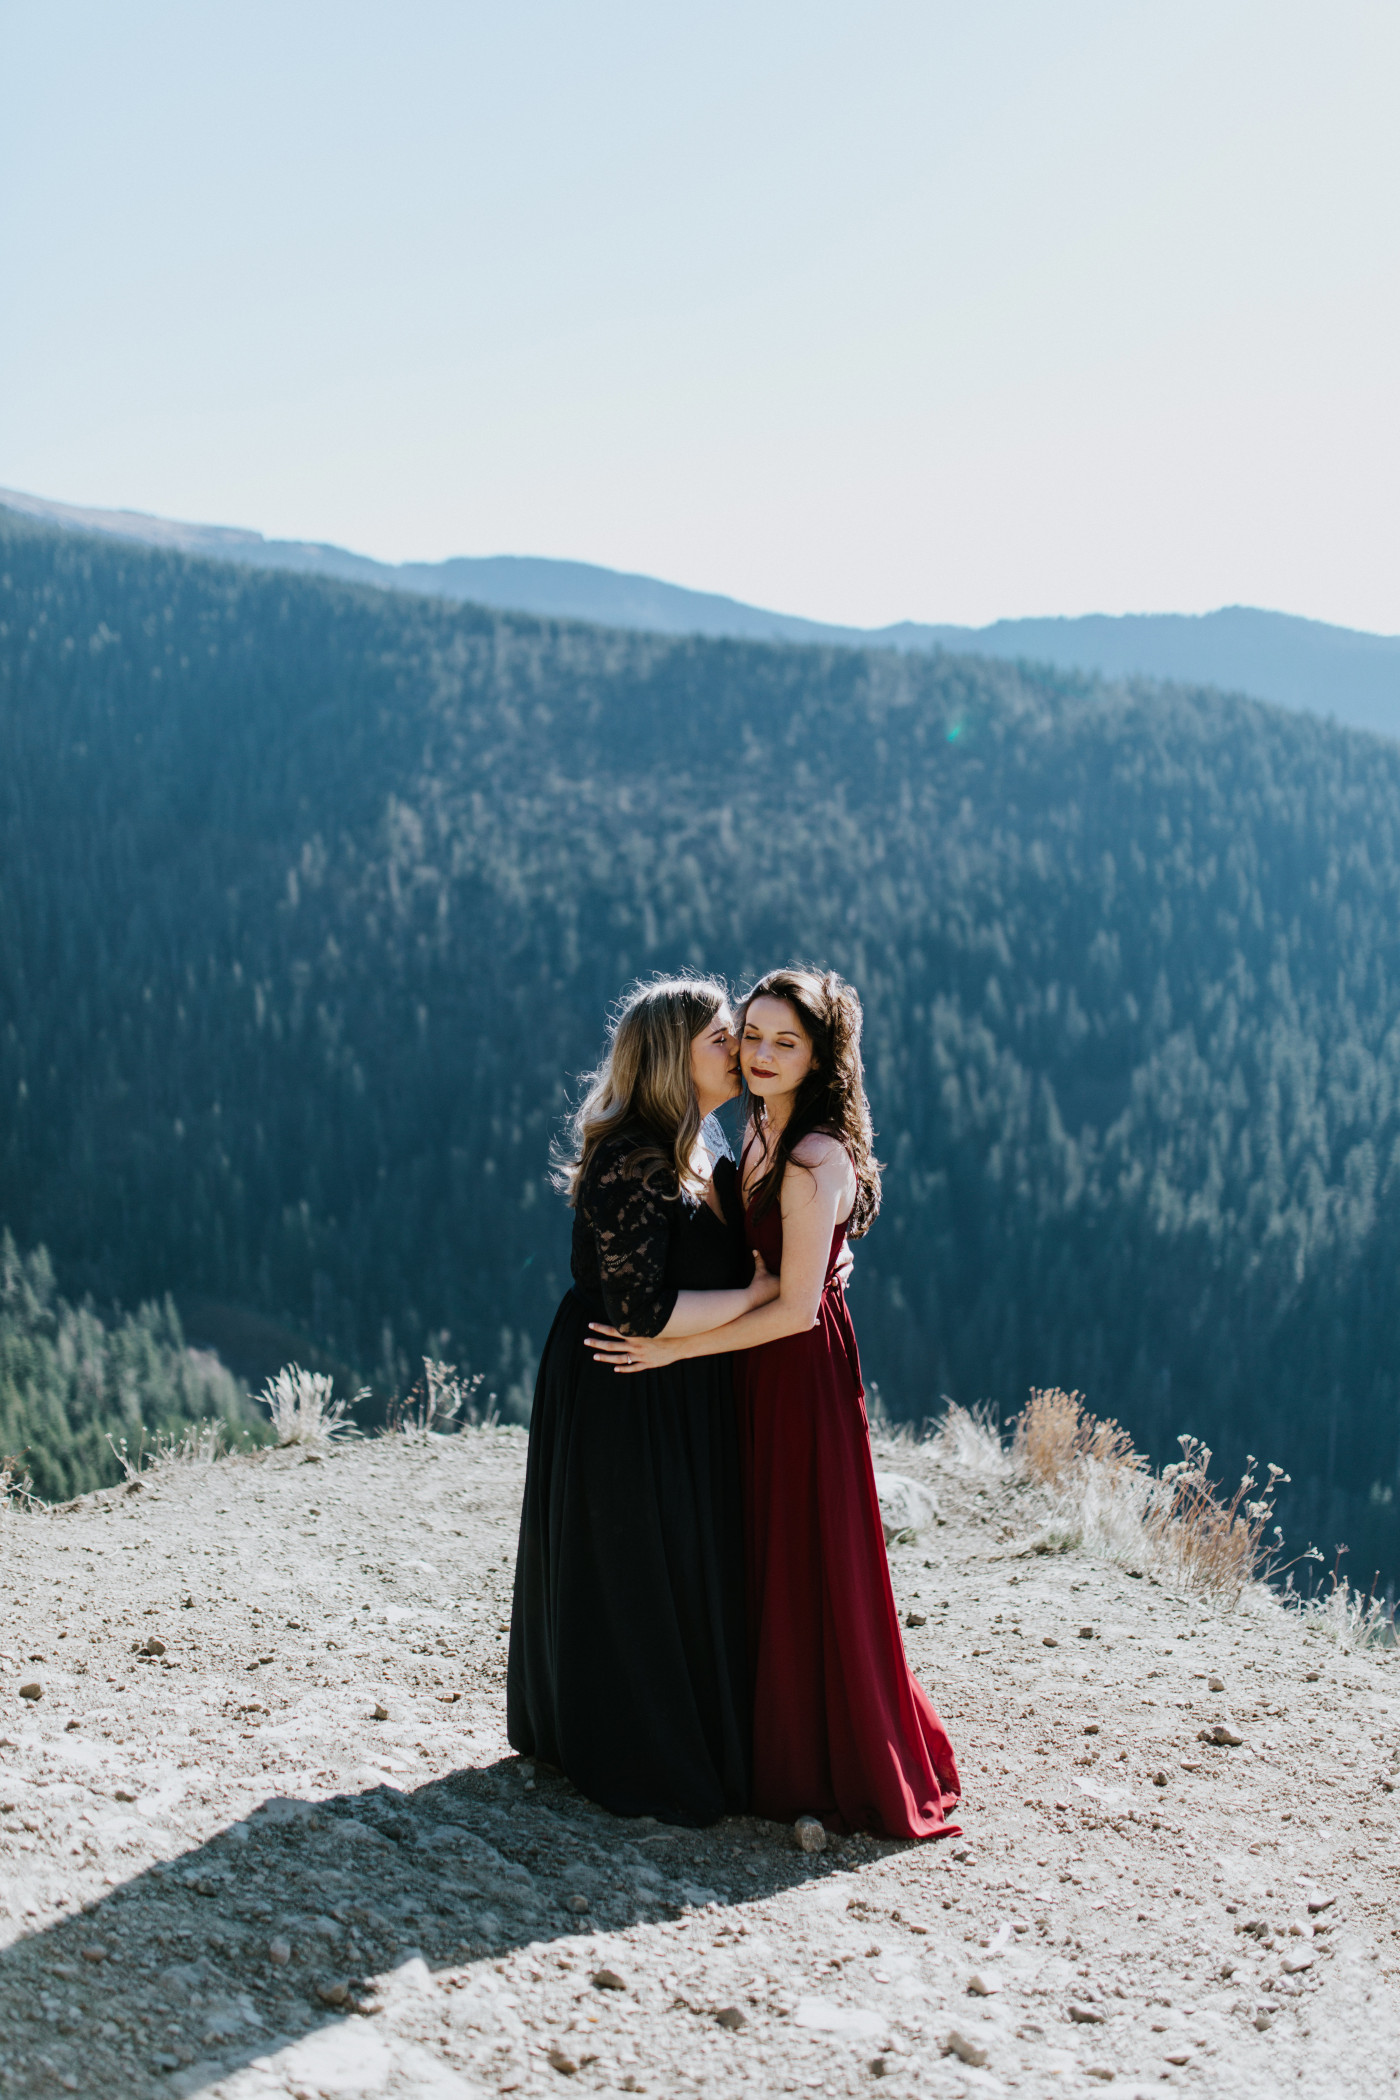 Tiffany and Hayley hugging. Elopement photography at the Columbia River Gorge by Sienna Plus Josh.